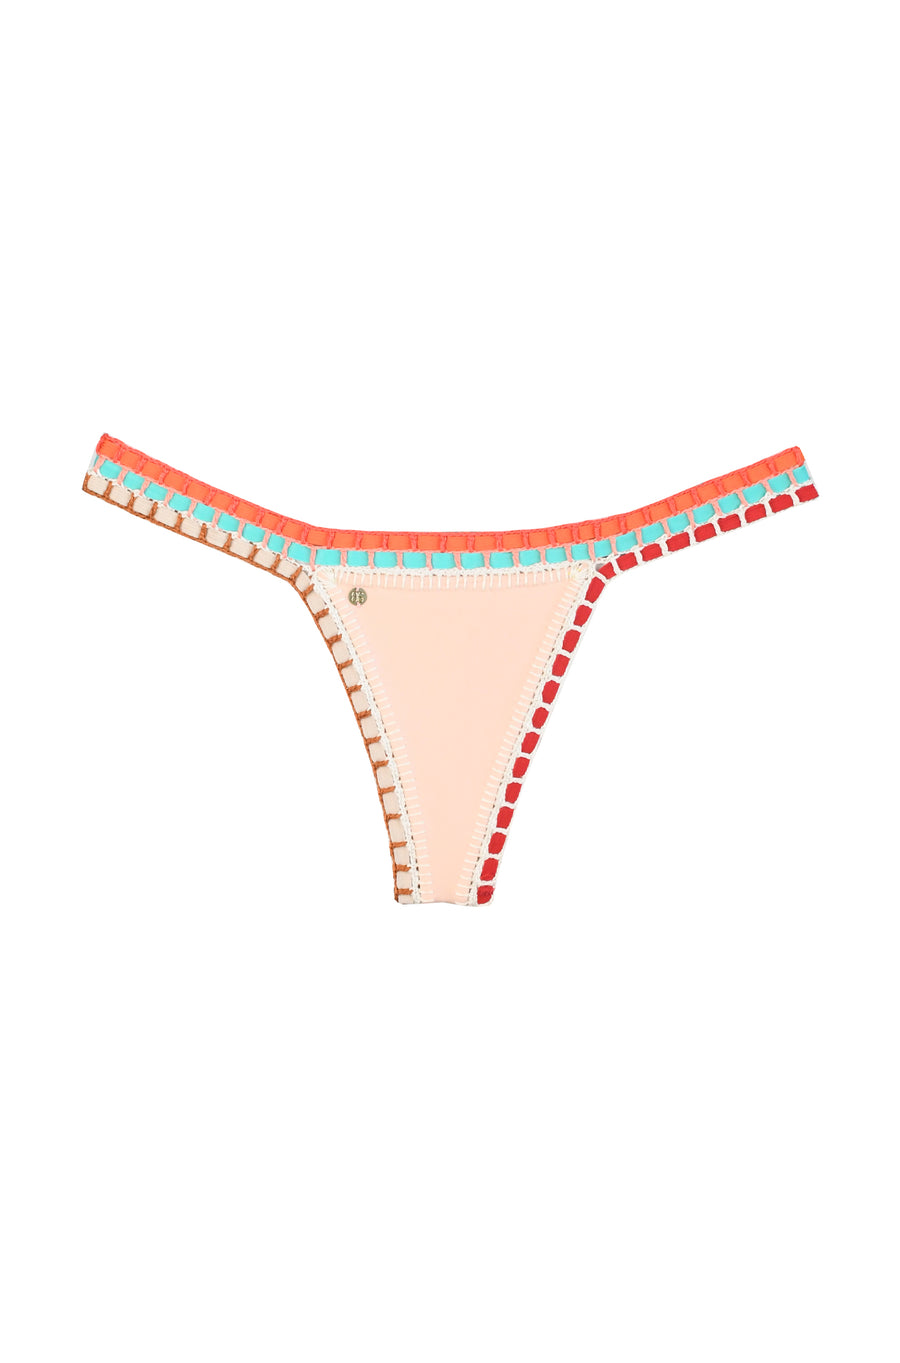 Nude pink triangle bikini with red/orange/turquoise crochet detail around all borders. No ties, lined with elastic for a conforming fit.